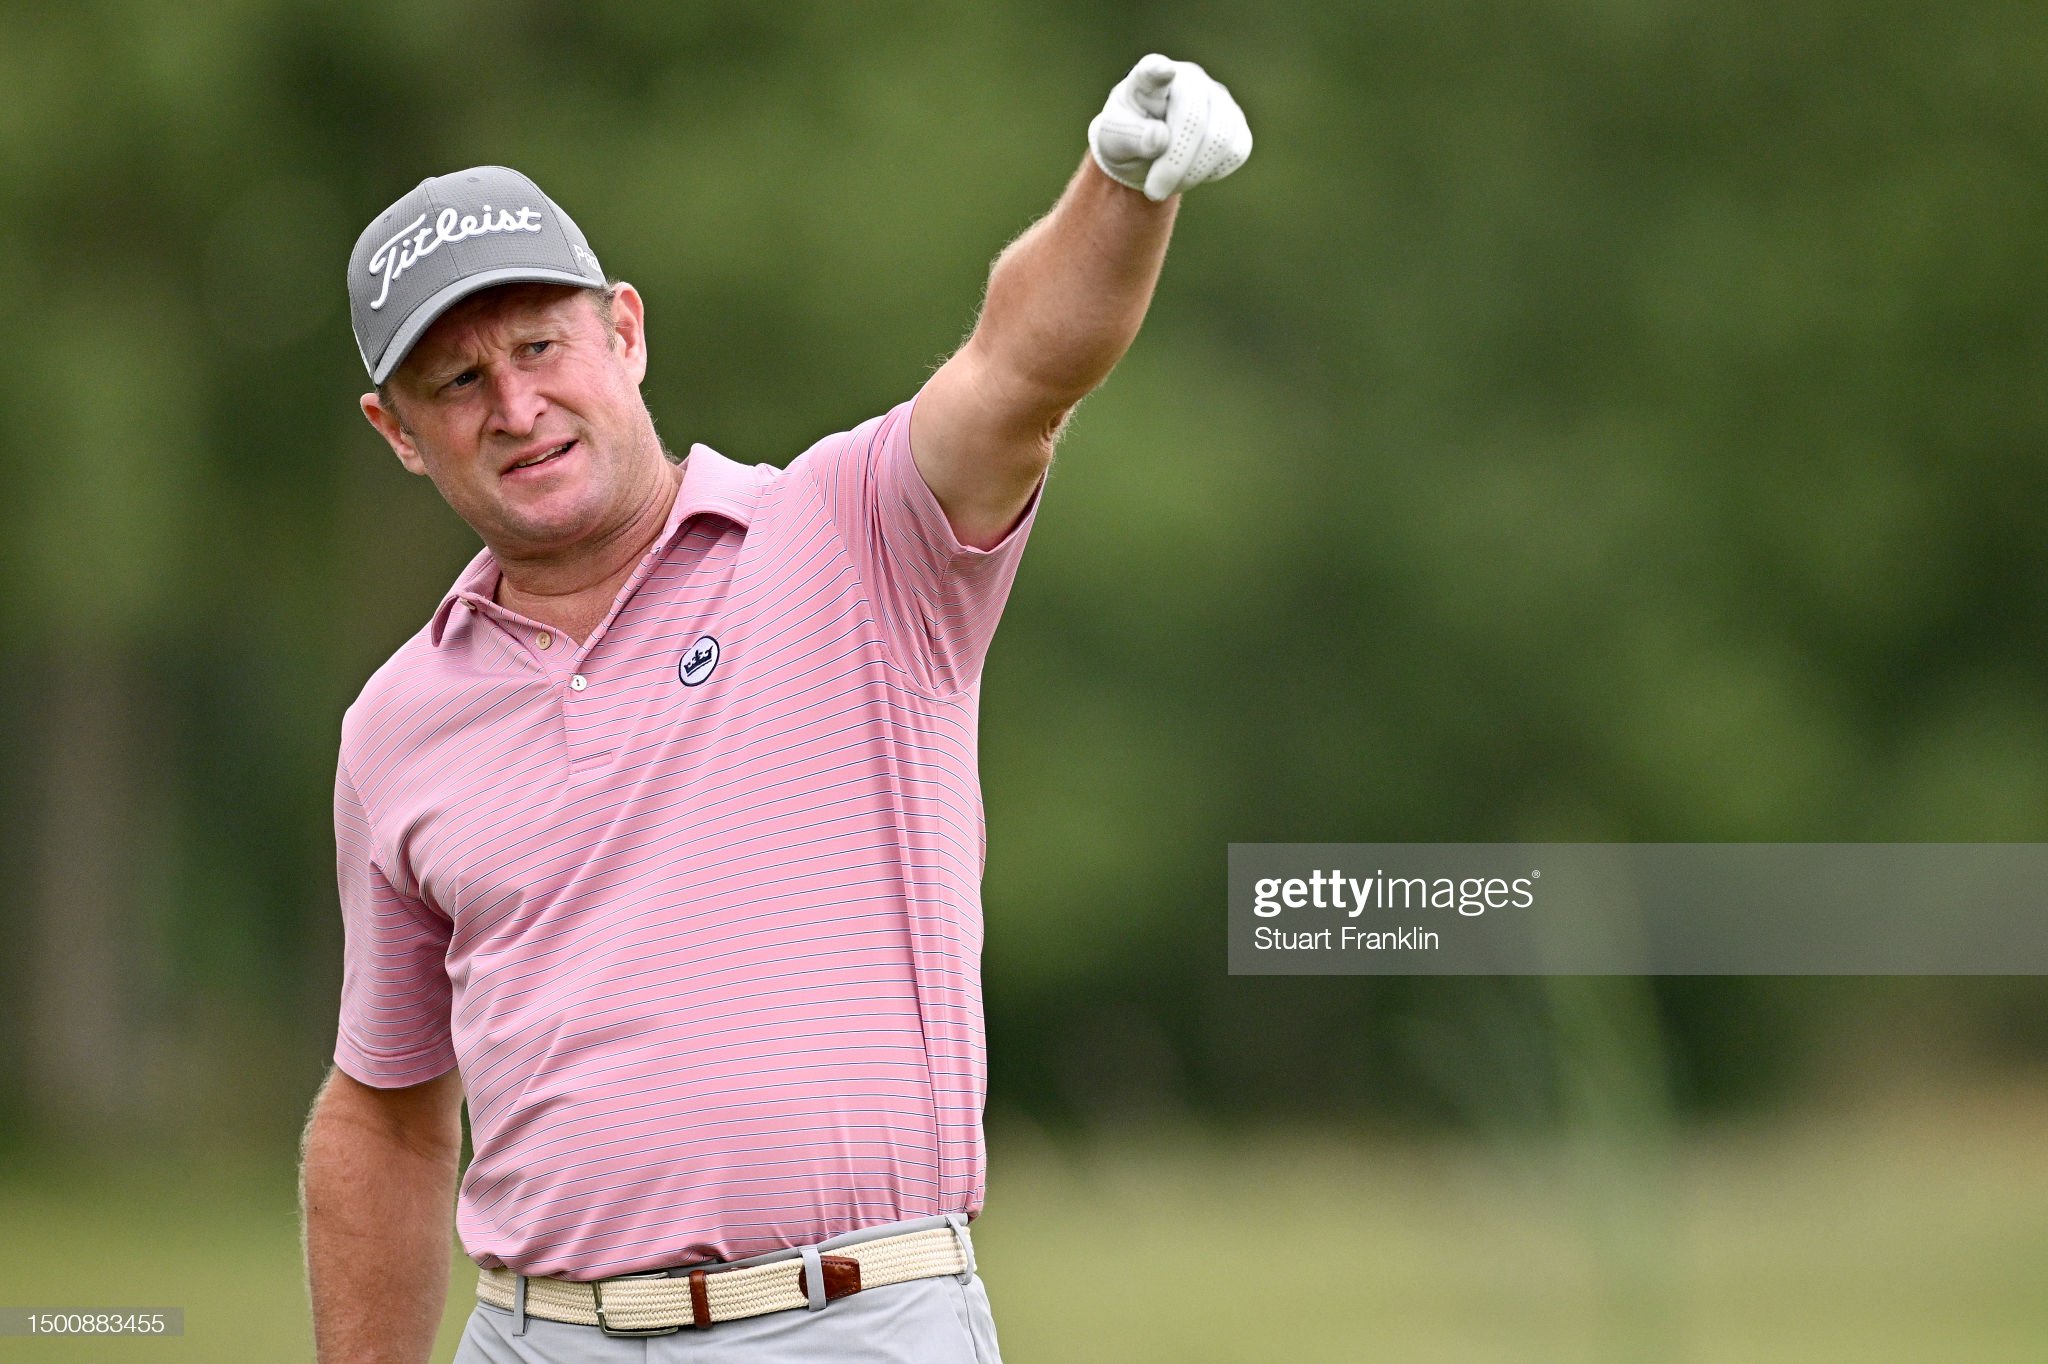 Jamie Donaldson Enjoyed a Welcome Return to Form at the Betfred British Masters